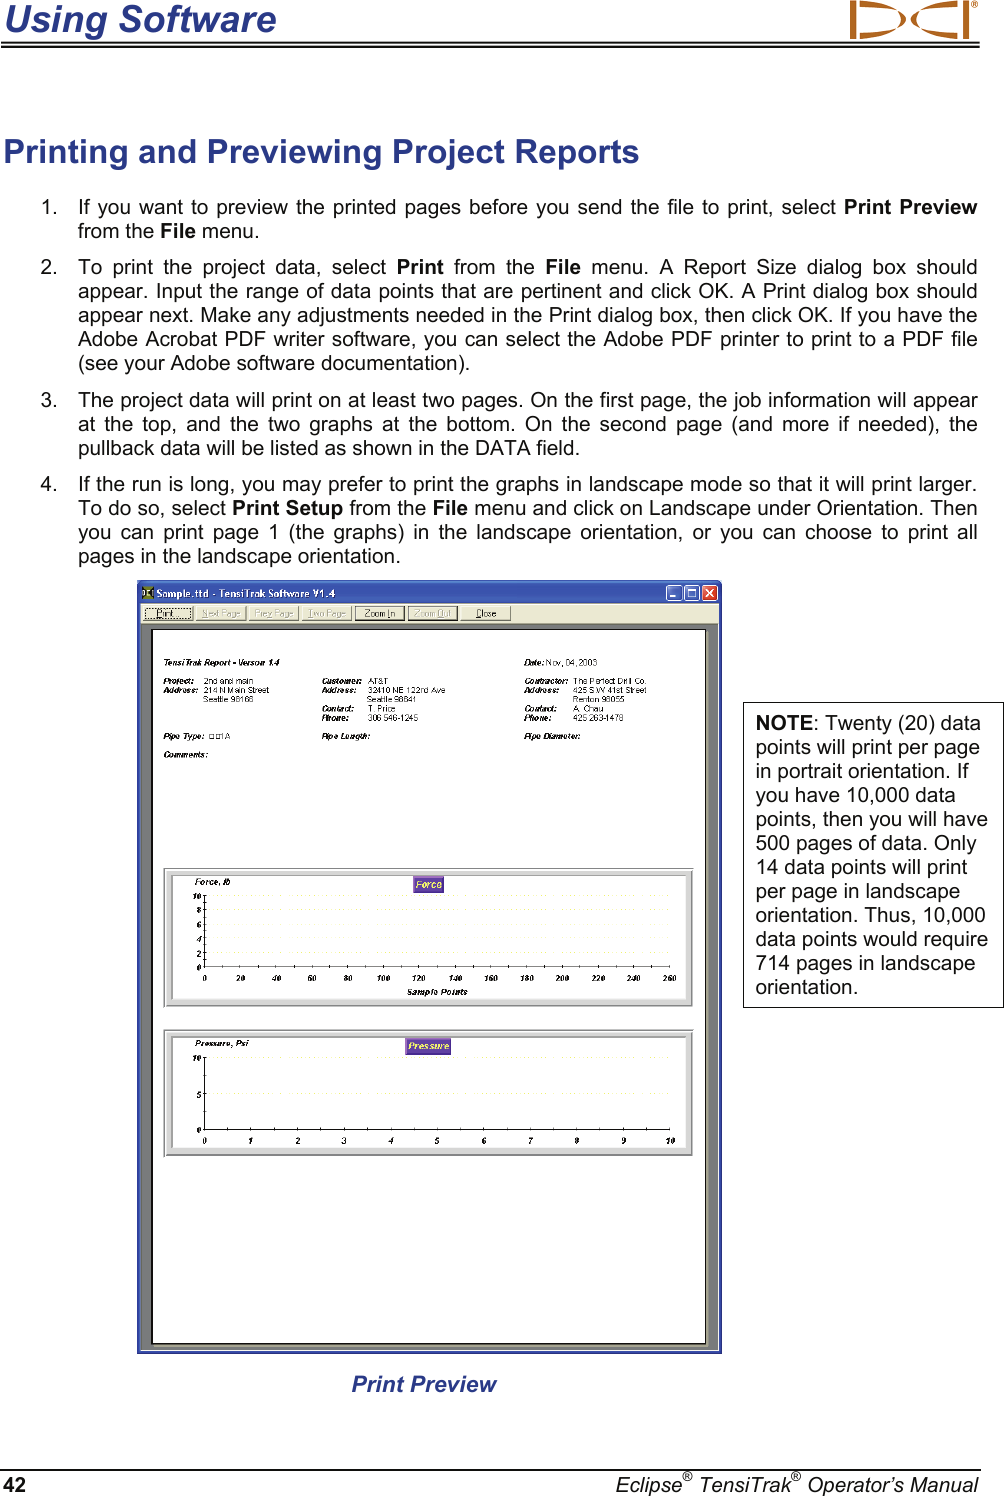 Using Software  42  Eclipse® TensiTrak® Operator’s Manual Printing and Previewing Project Reports  1.  If you want to preview the printed pages before you send the file to print, select Print Preview from the File menu. 2.  To print the project data, select Print  from the File  menu. A Report Size dialog box should appear. Input the range of data points that are pertinent and click OK. A Print dialog box should appear next. Make any adjustments needed in the Print dialog box, then click OK. If you have the Adobe Acrobat PDF writer software, you can select the Adobe PDF printer to print to a PDF file (see your Adobe software documentation).  3.  The project data will print on at least two pages. On the first page, the job information will appear at the top, and the two graphs at the bottom. On the second page (and more if needed), the pullback data will be listed as shown in the DATA field. 4.  If the run is long, you may prefer to print the graphs in landscape mode so that it will print larger. To do so, select Print Setup from the File menu and click on Landscape under Orientation. Then you can print page 1 (the graphs) in the landscape orientation, or you can choose to print all pages in the landscape orientation.                       Print Preview                      NOTE: Twenty (20) data points will print per page in portrait orientation. If you have 10,000 data points, then you will have 500 pages of data. Only 14 data points will print per page in landscape orientation. Thus, 10,000 data points would require 714 pages in landscape orientation.  